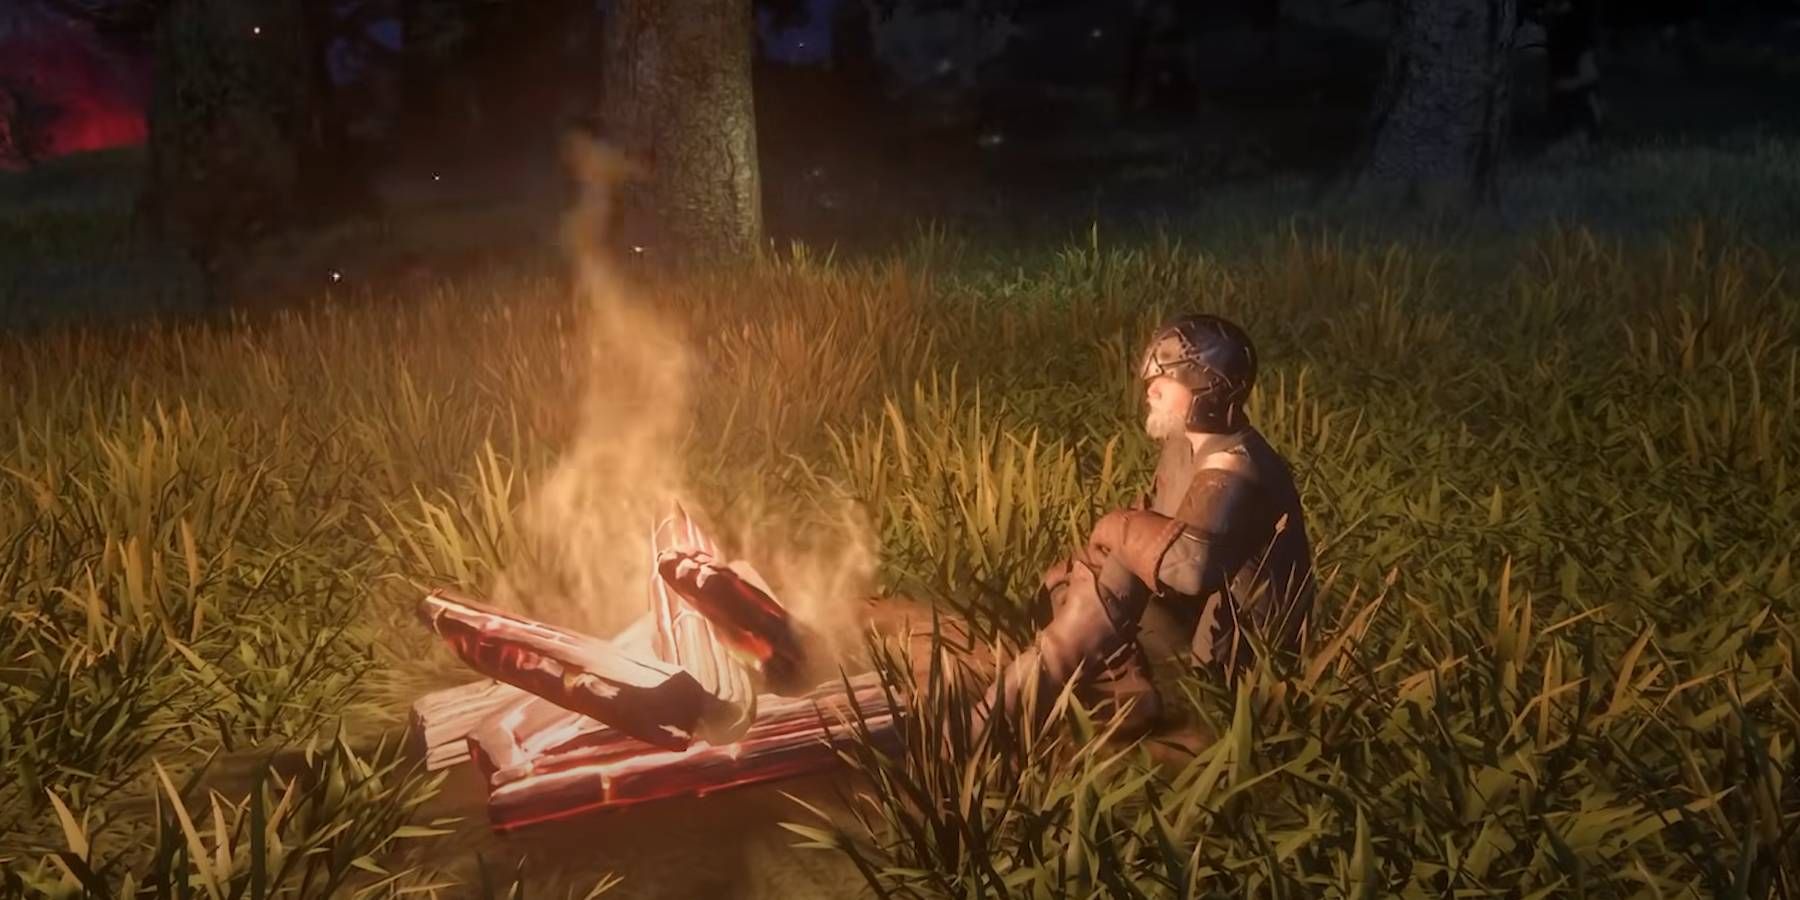 Enshrouded campfire used to cook food items into better recipes for character buffs